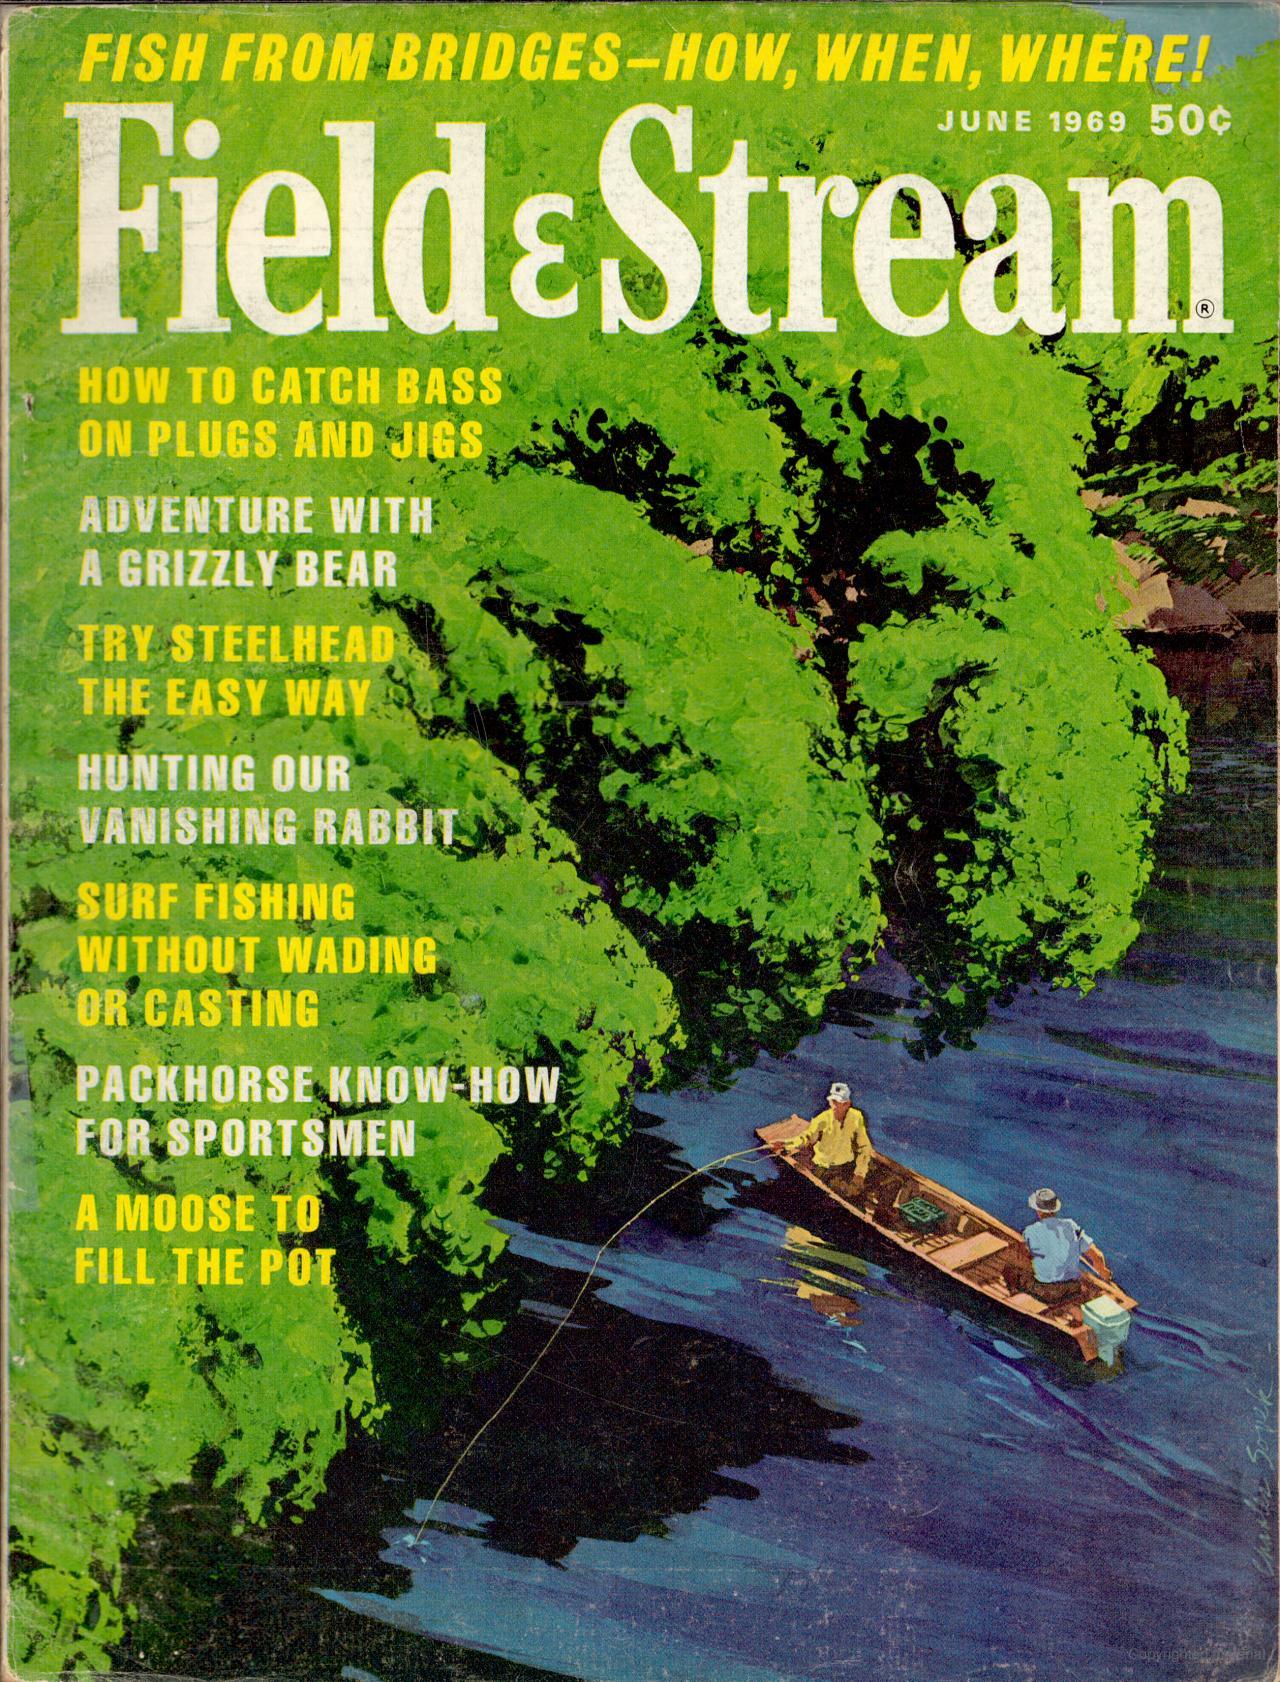 The June 1969 cover of Field & Stream